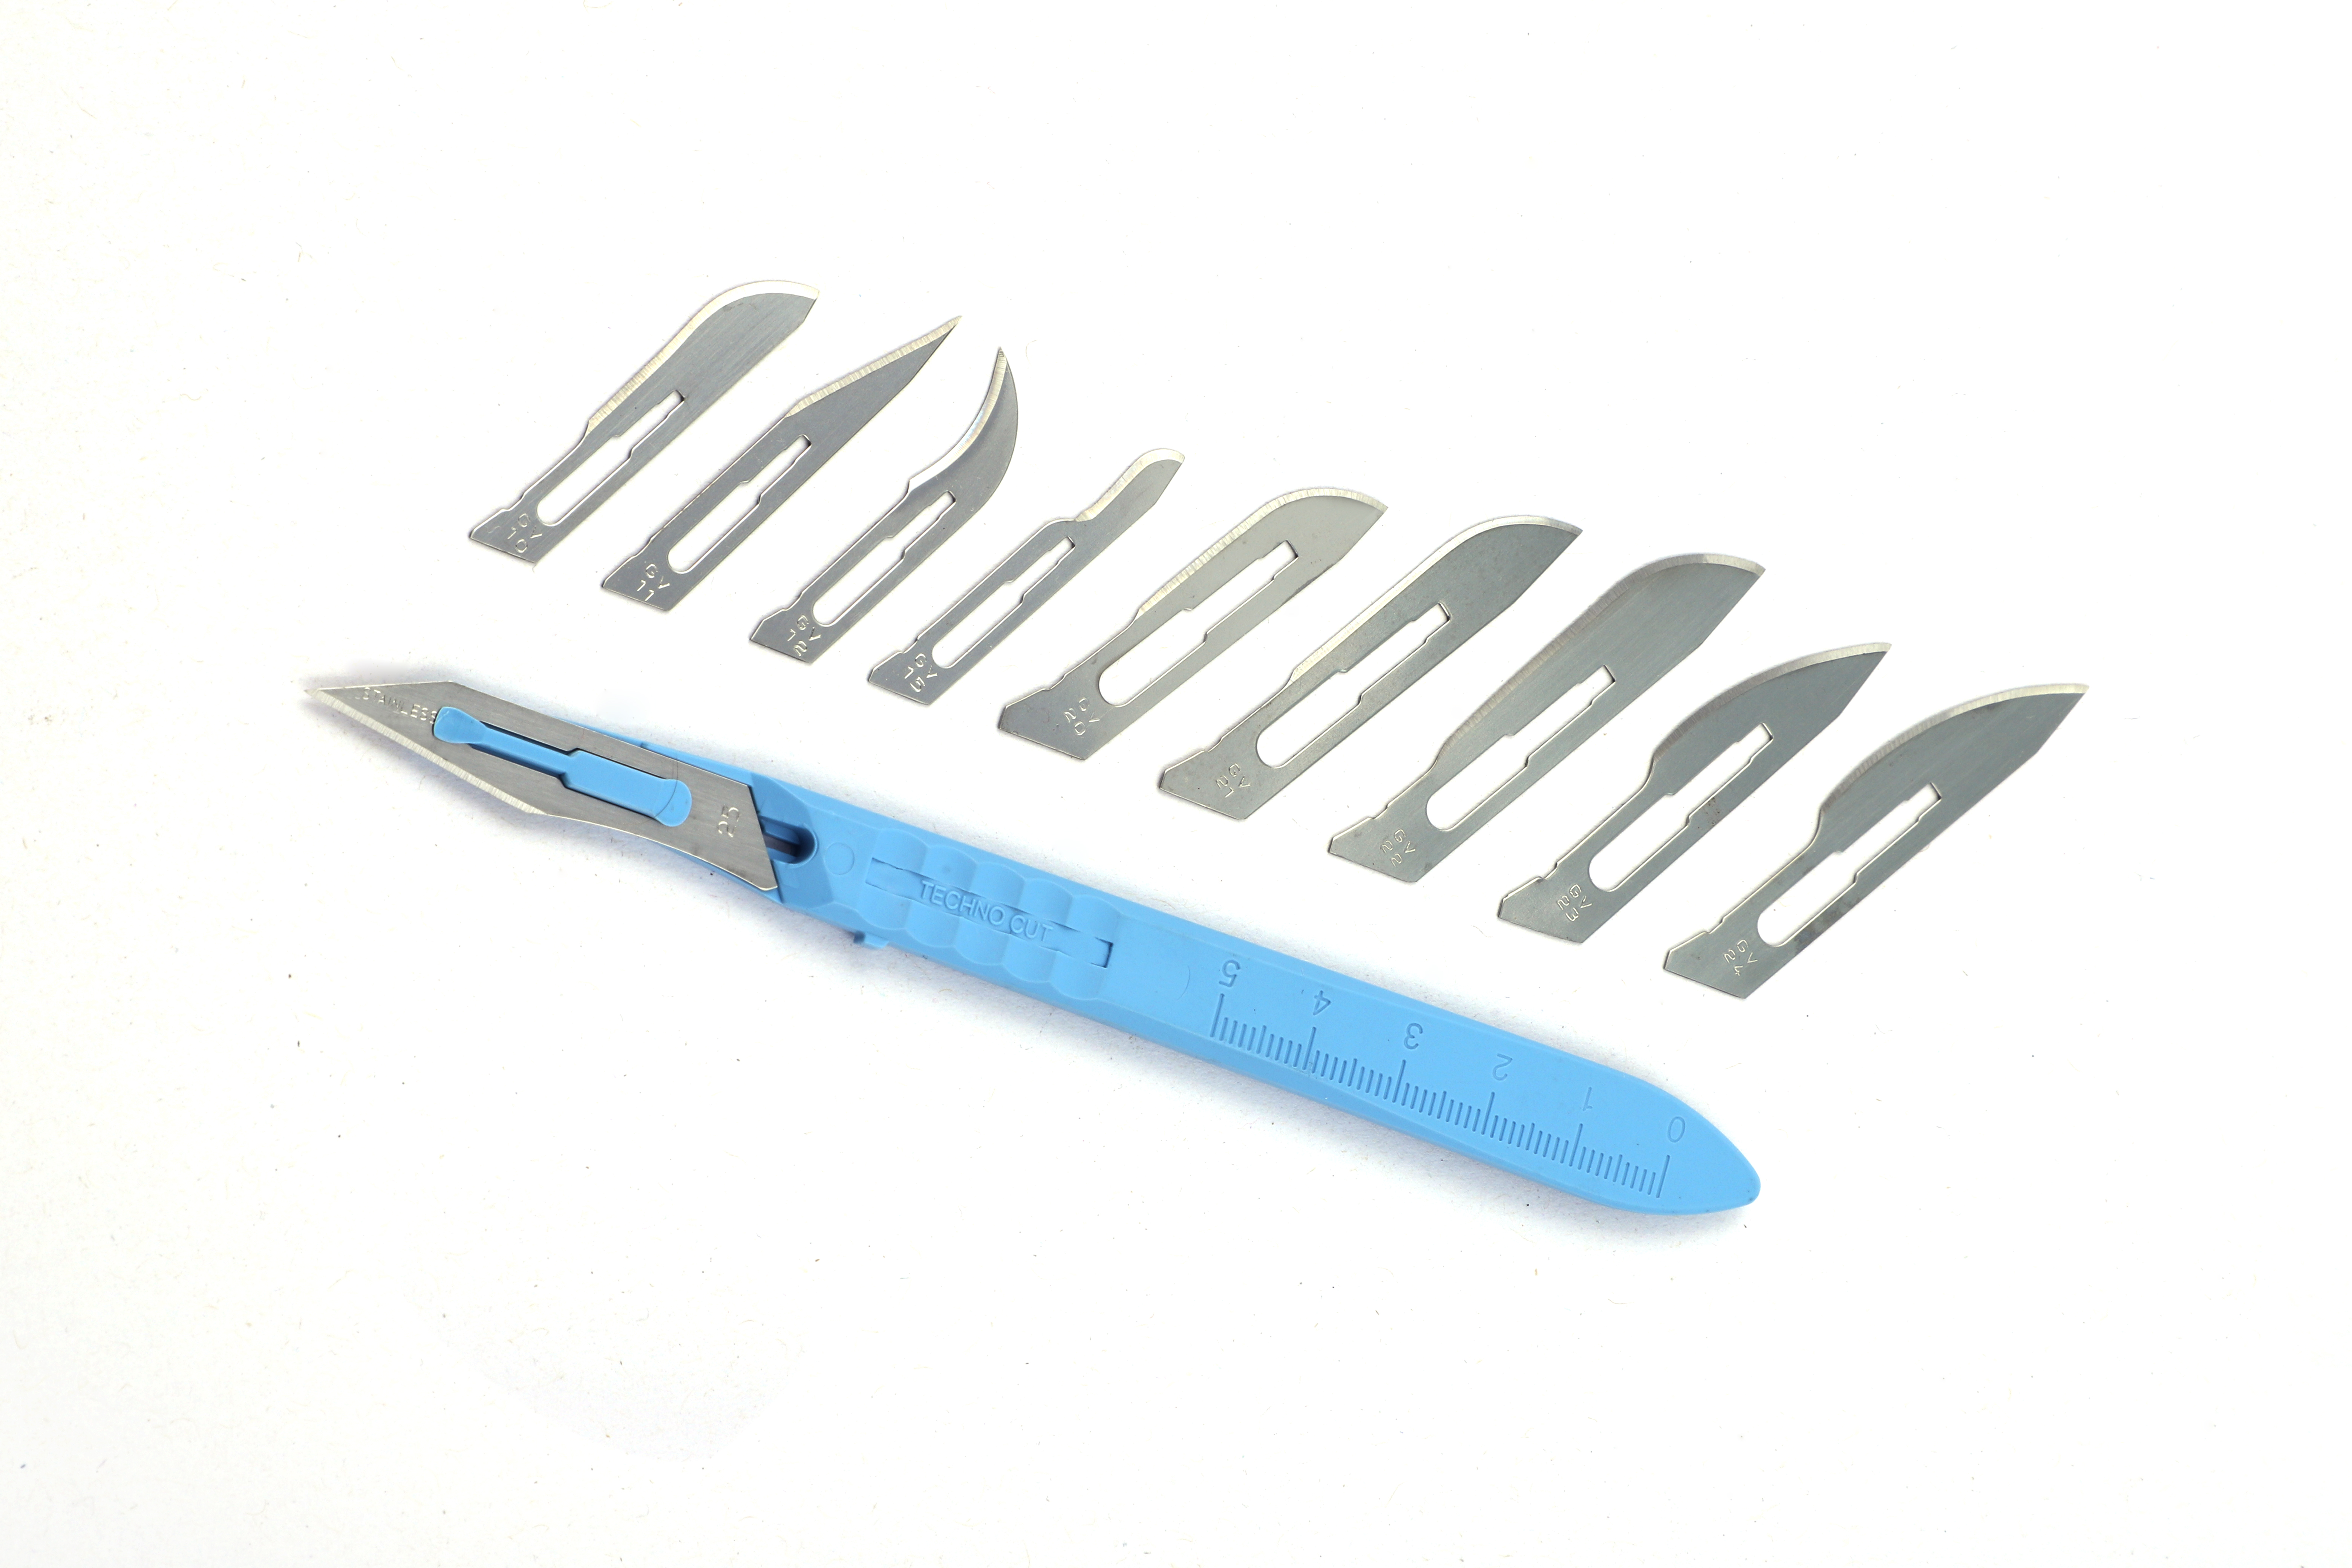 GLASS VAN Surgical Blades pic